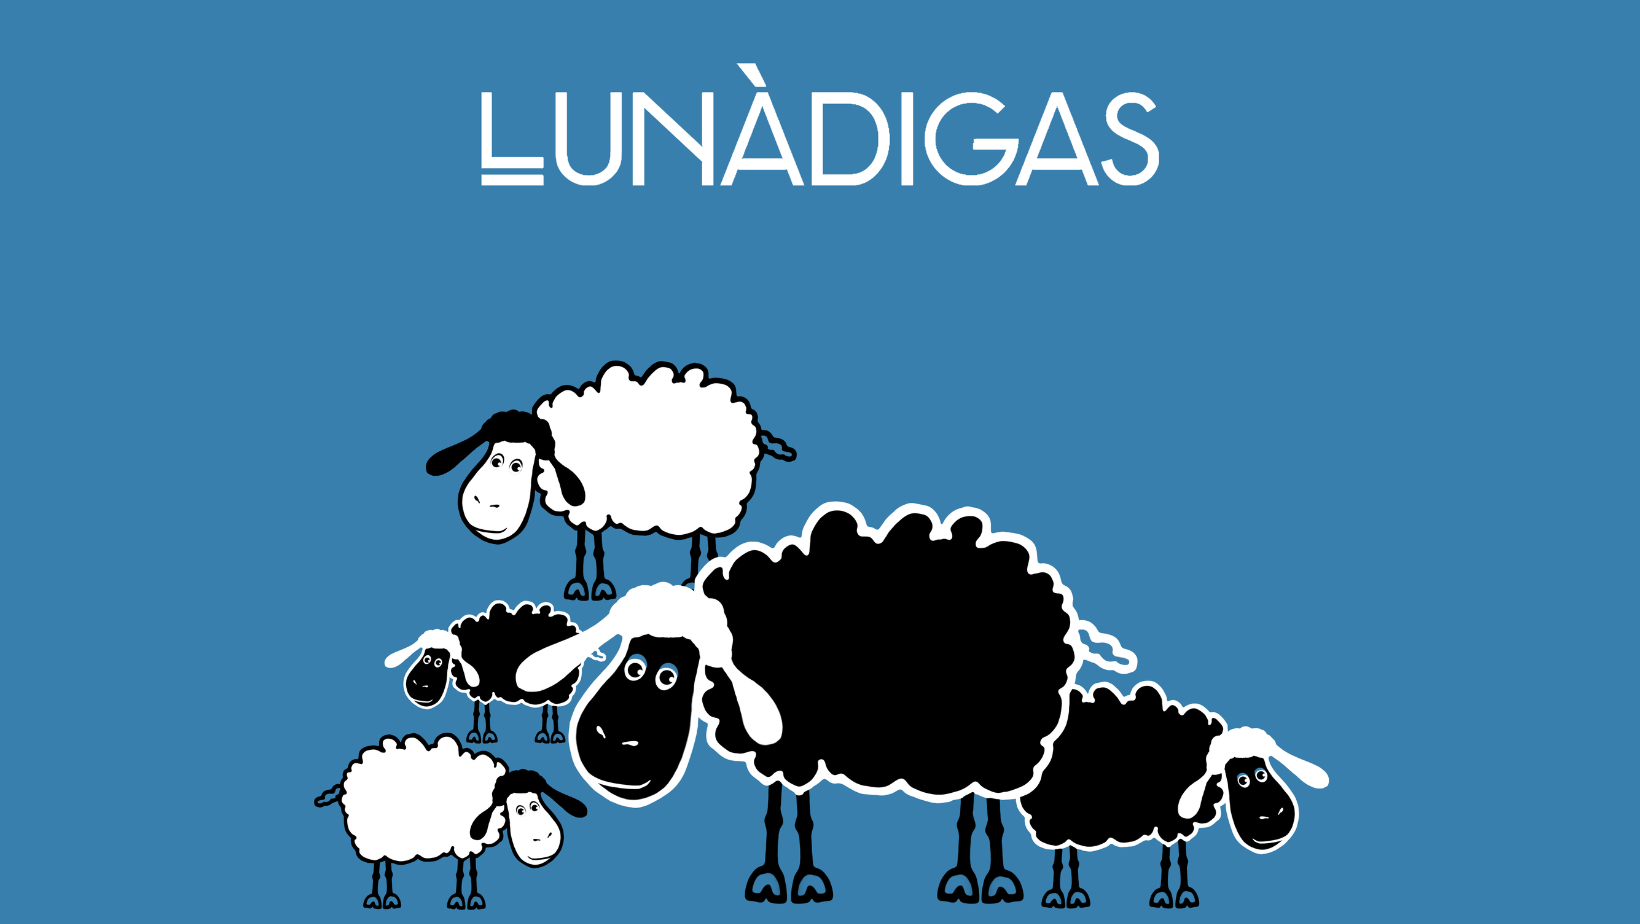 Between Etymology And Anthropology: The Word (for The) Lunàdigas